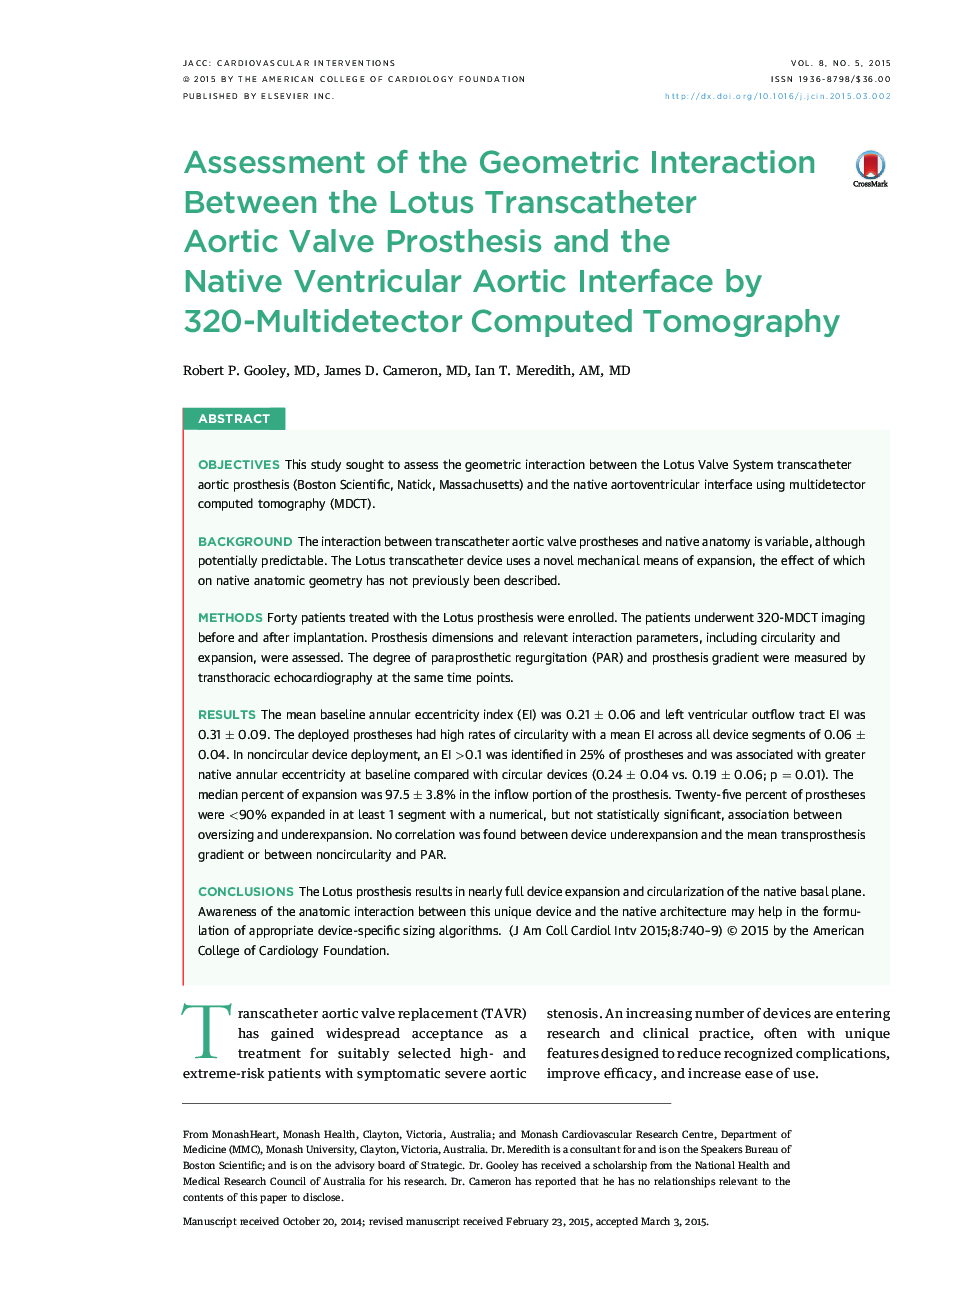 Assessment of the Geometric Interaction Between the Lotus Transcatheter Aortic Valve Prosthesis and the Native Ventricular Aortic Interface by 320-Multidetector Computed Tomography 